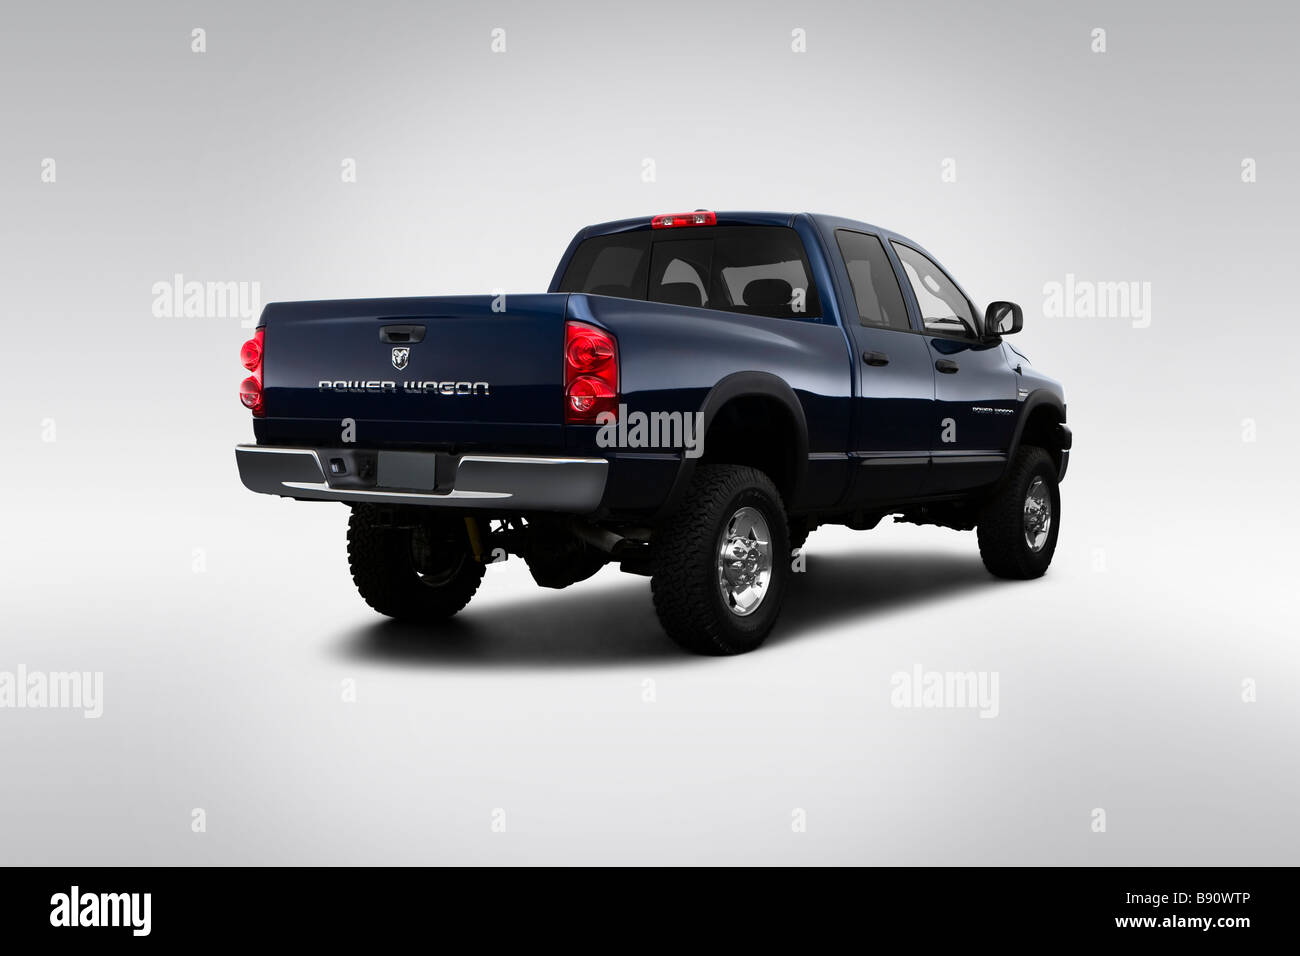 2009 Dodge Ram 2500 SLT in Blue - Rear angle view Stock Photo